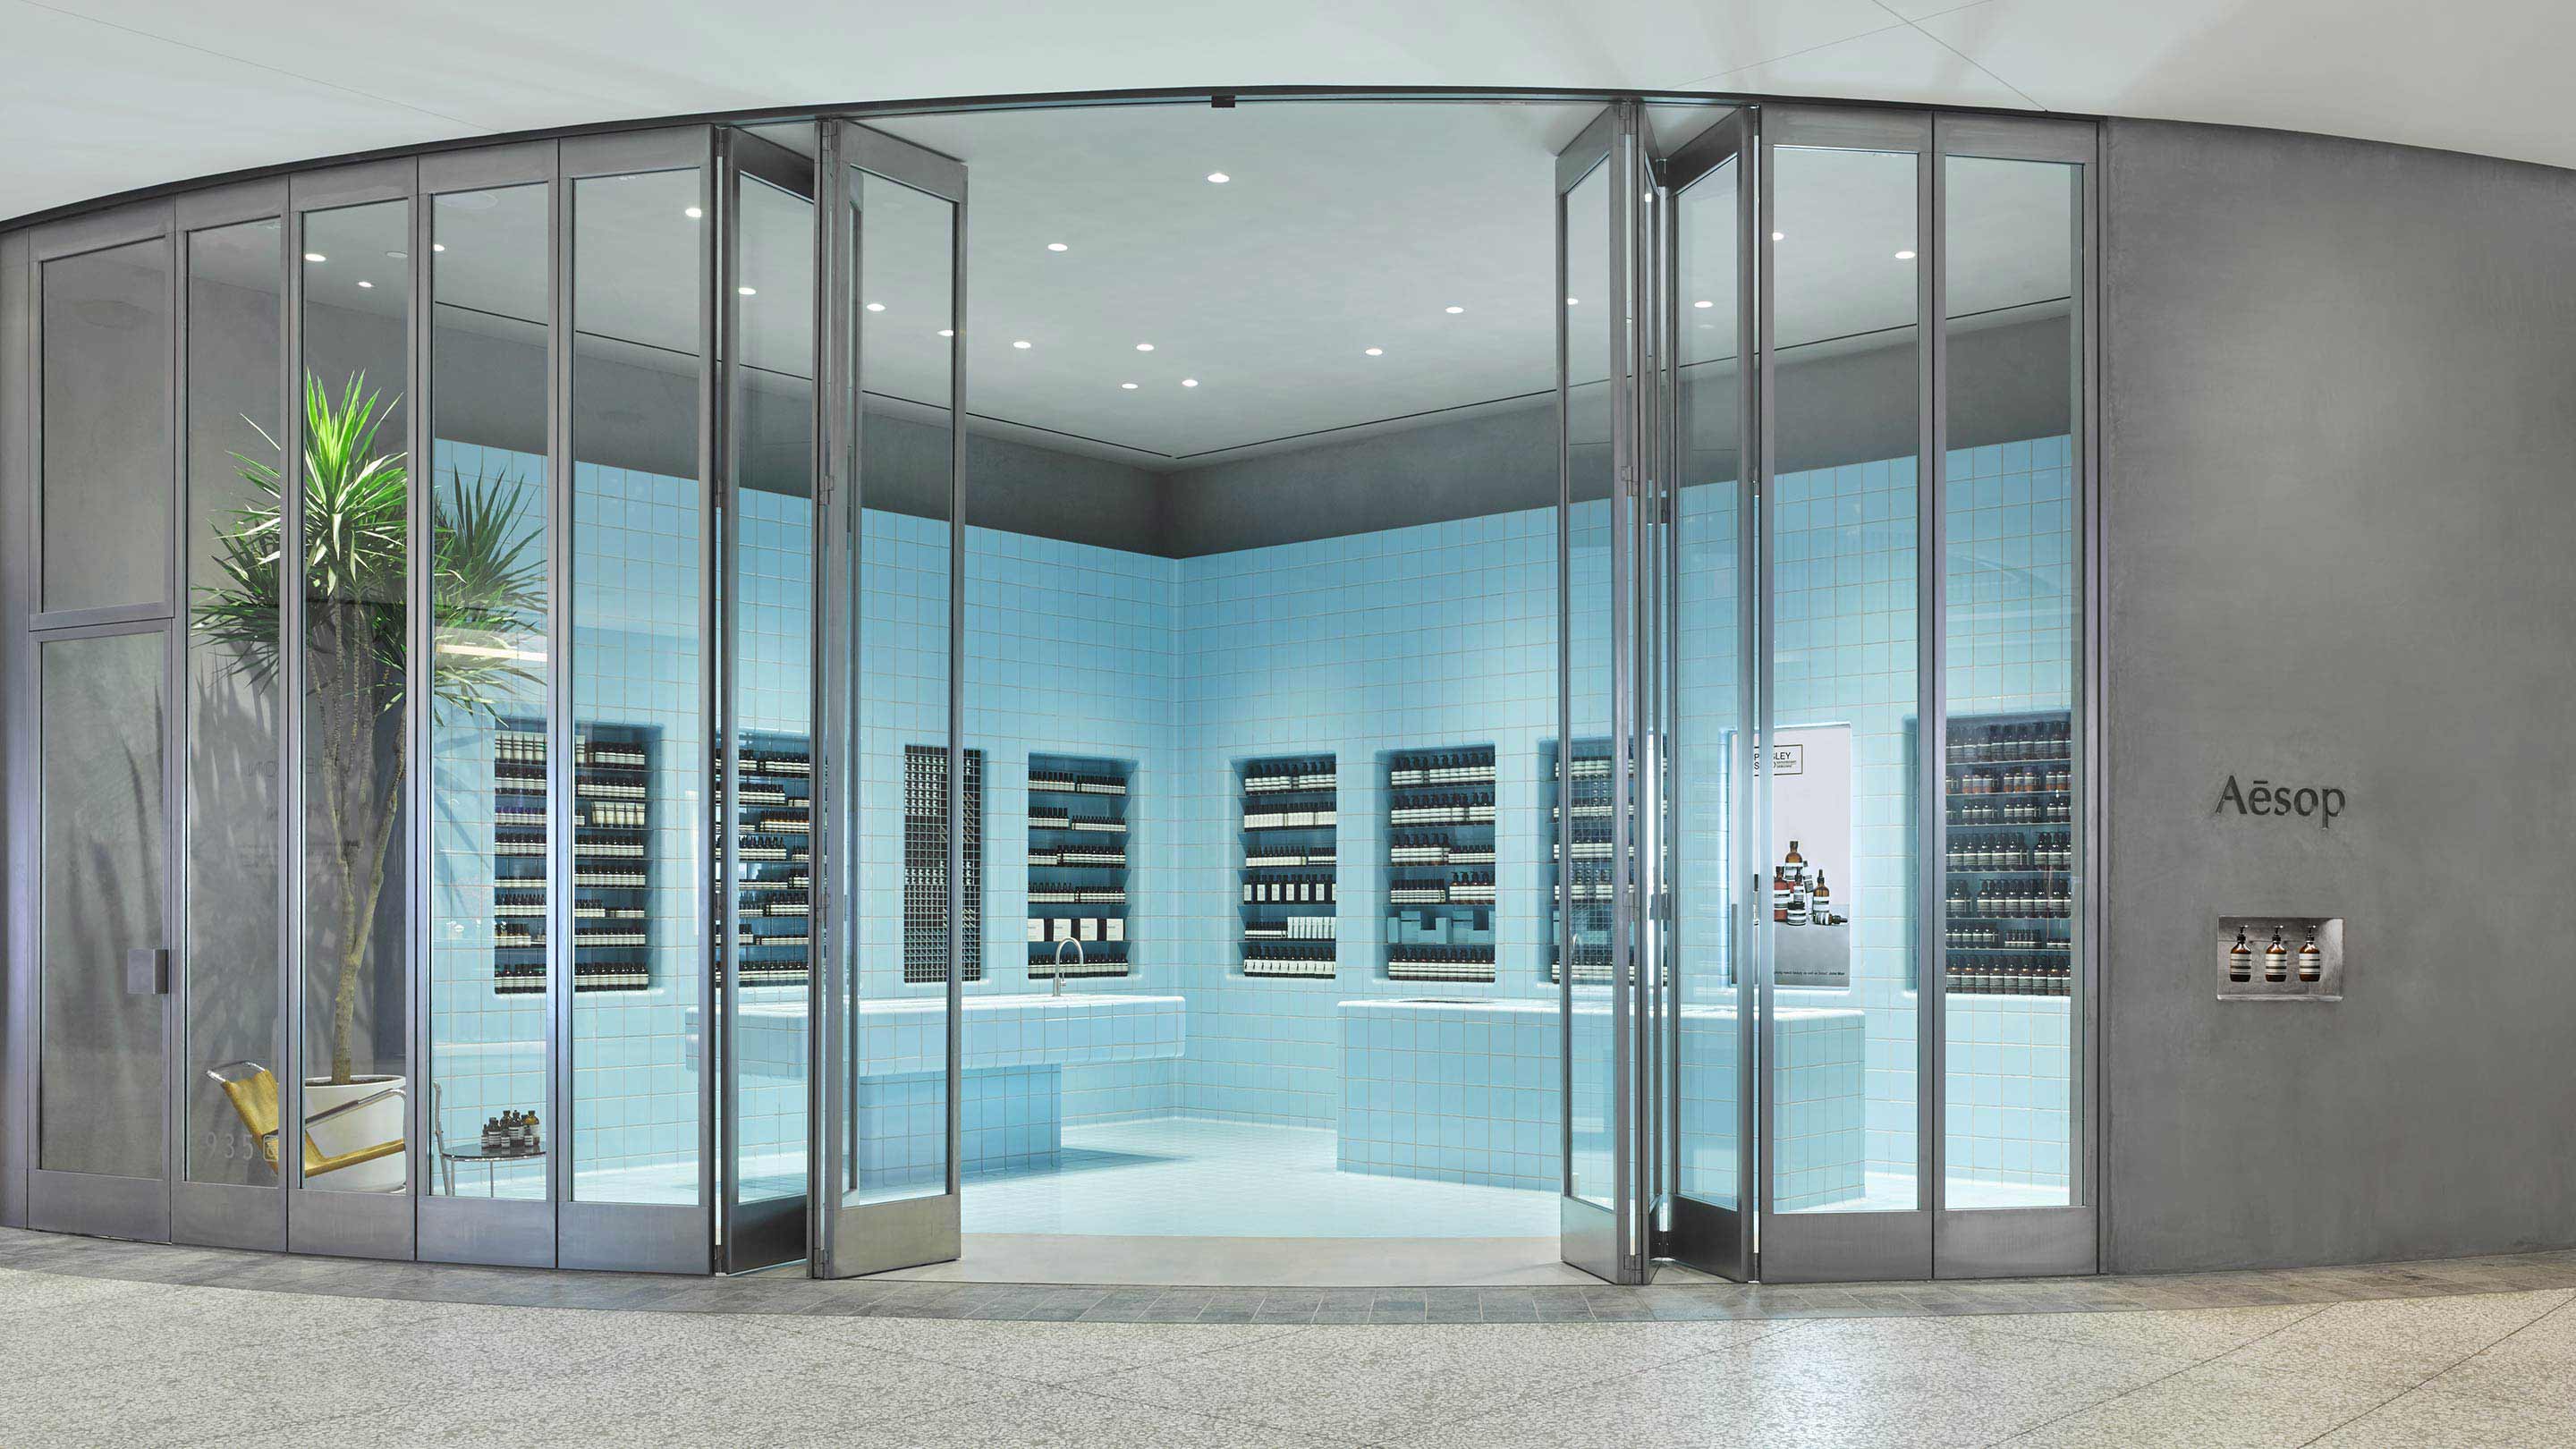 Sliding glass doors with steel frames open displaying the light-blue tiled store interior. 